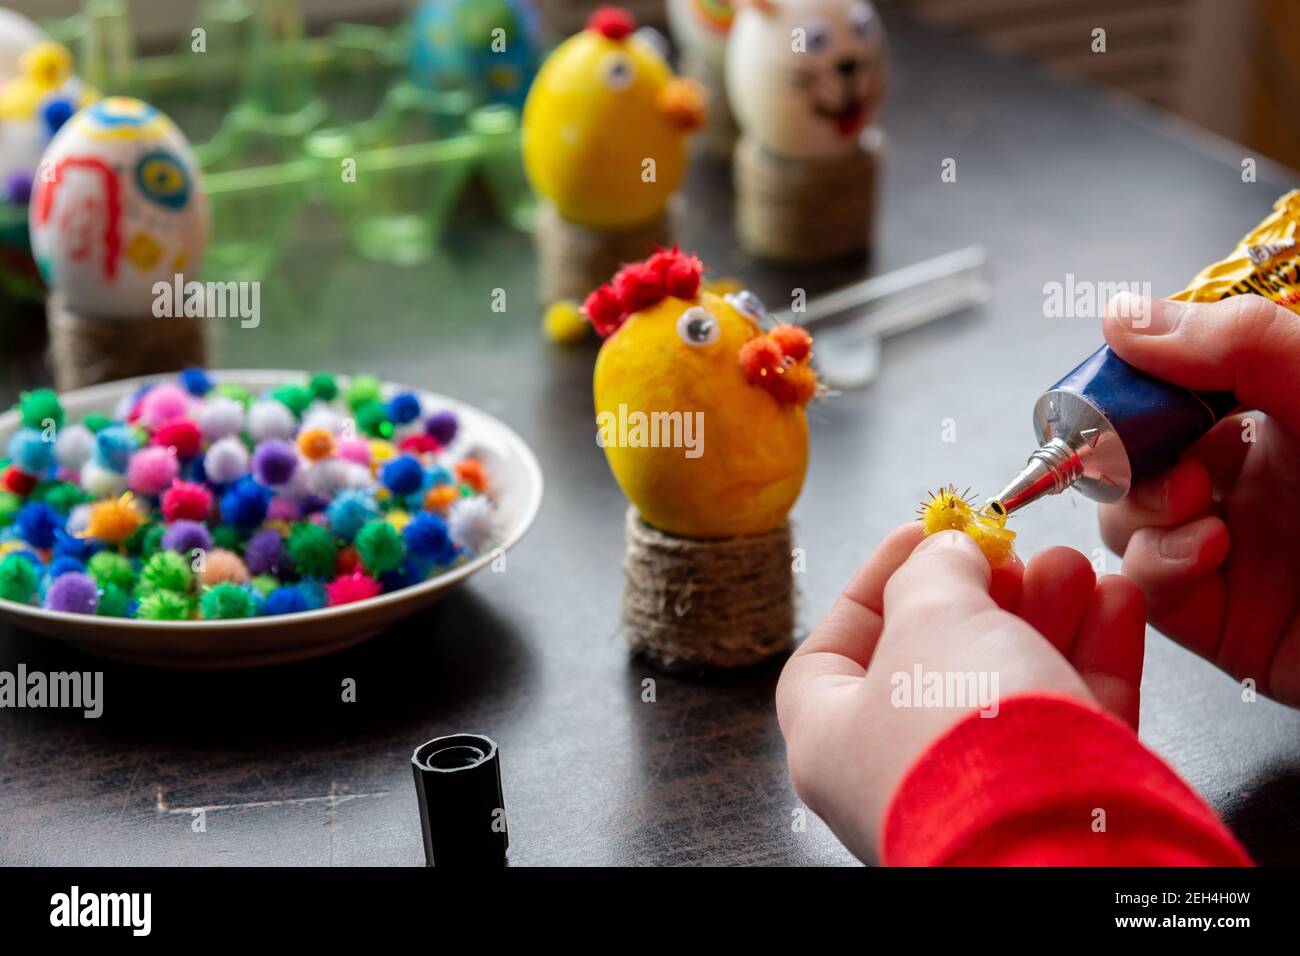 Children's hands apply glue to the egg craft element Stock Photo